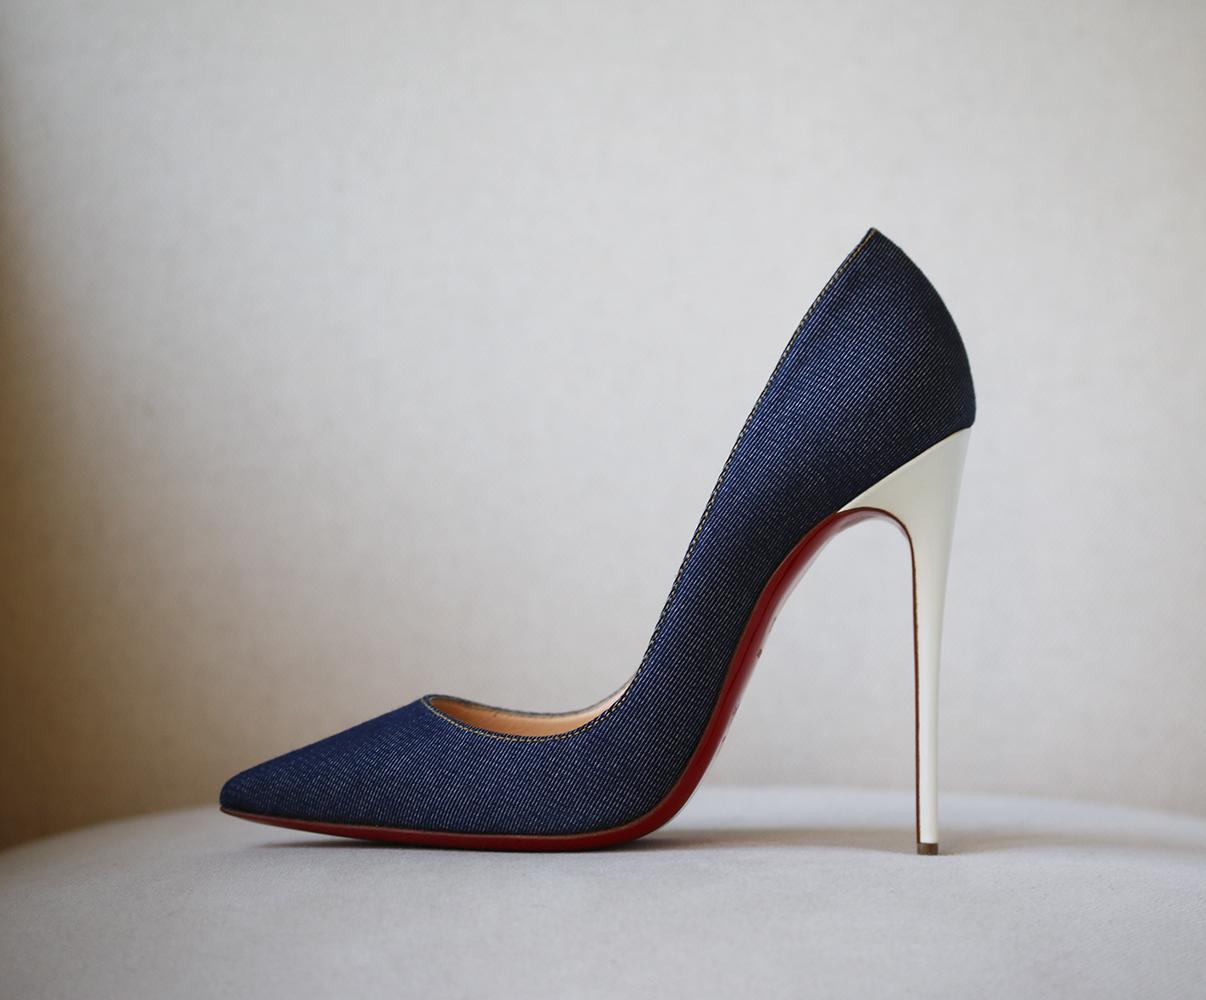 One of Christian Louboutin's most notable designs, the 'So Kate' pumps are lauded for their high pitch and streamlined silhouette. This dark-blue denim version has a white patent leather-covered heel that adds to the cool, contemporary look. Heel